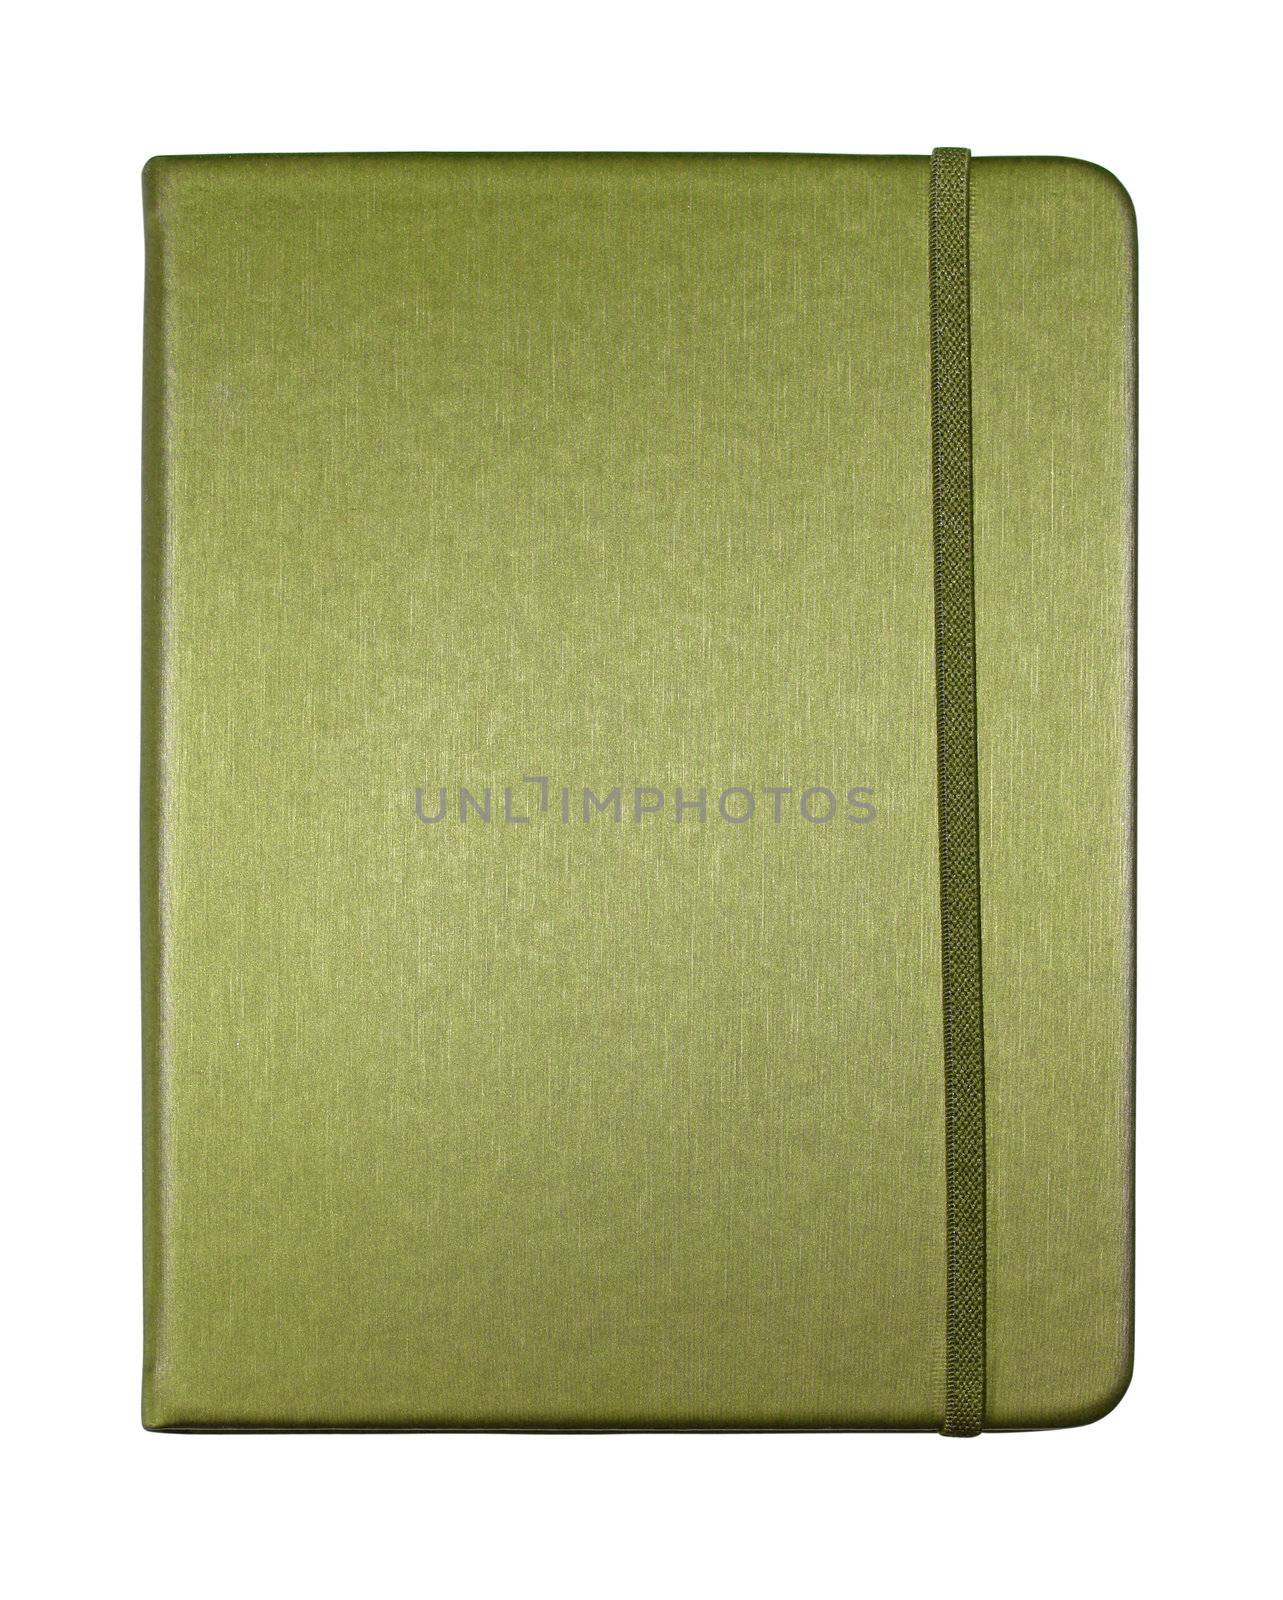 silk green color cover note book isolated on white background